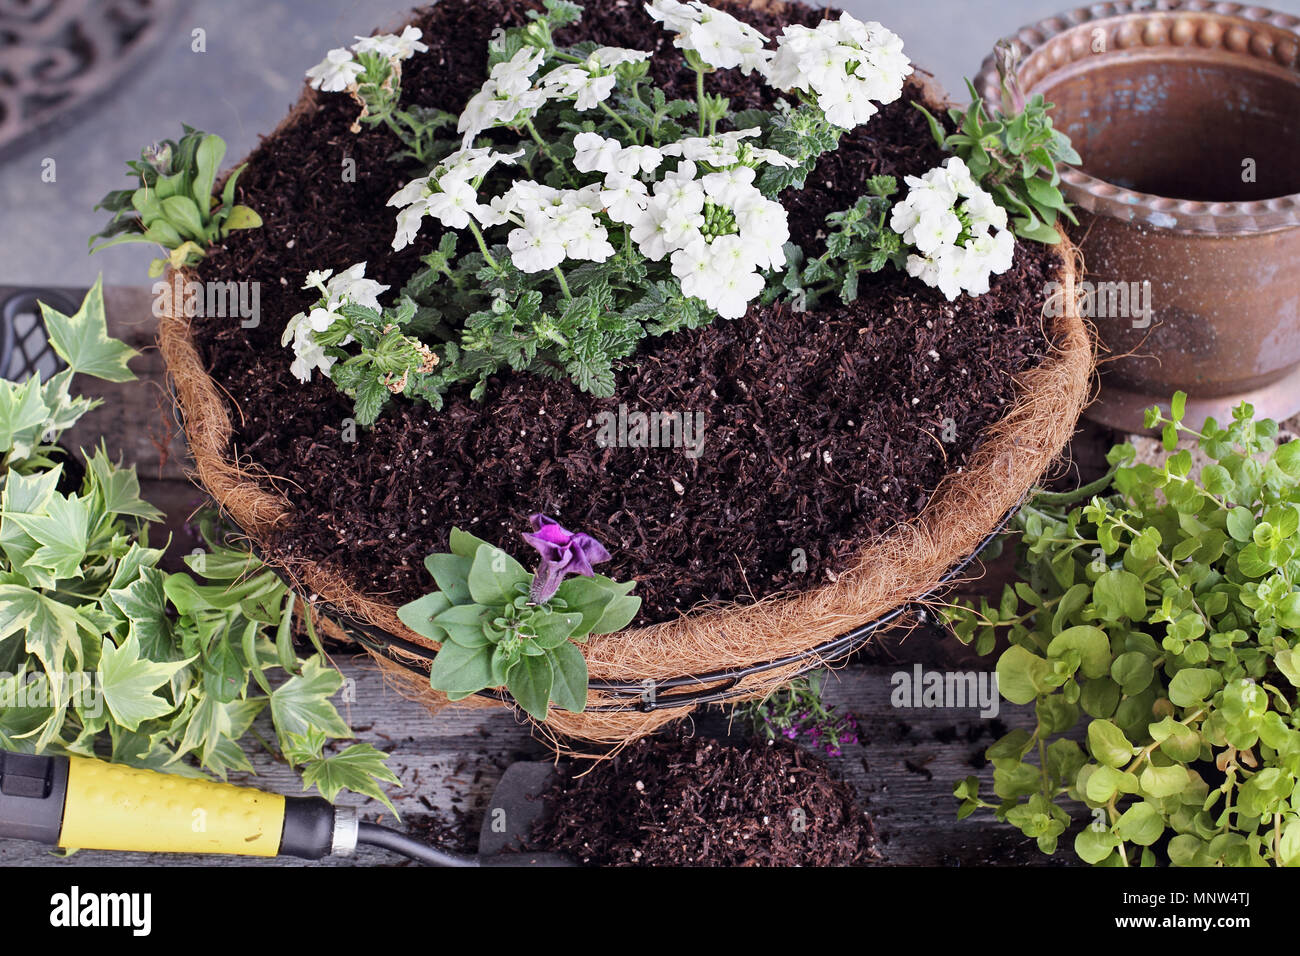 Demonstration of how to plant a hanging basket or pot of flowers. Flowers include Verbena, Petunias, Creeping Jenny, Ivy  and Alyssum. Image shot from Stock Photo